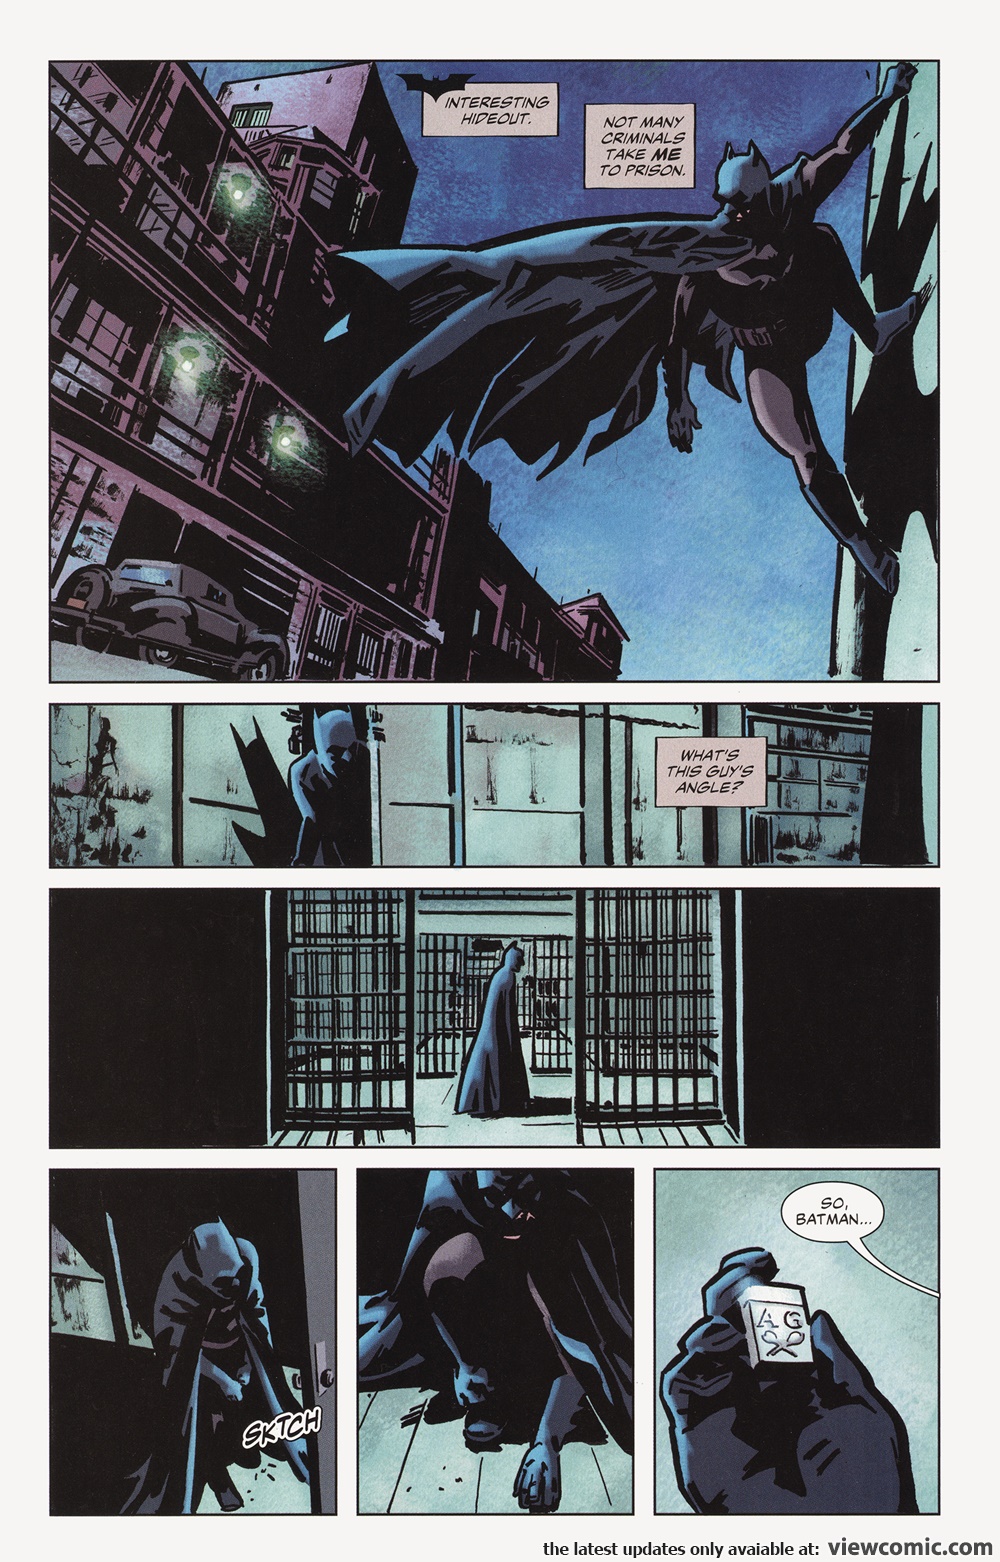 Batman In Noir Alley 001 2017 | Read Batman In Noir Alley 001 2017 comic  online in high quality. Read Full Comic online for free - Read comics  online in high quality .|